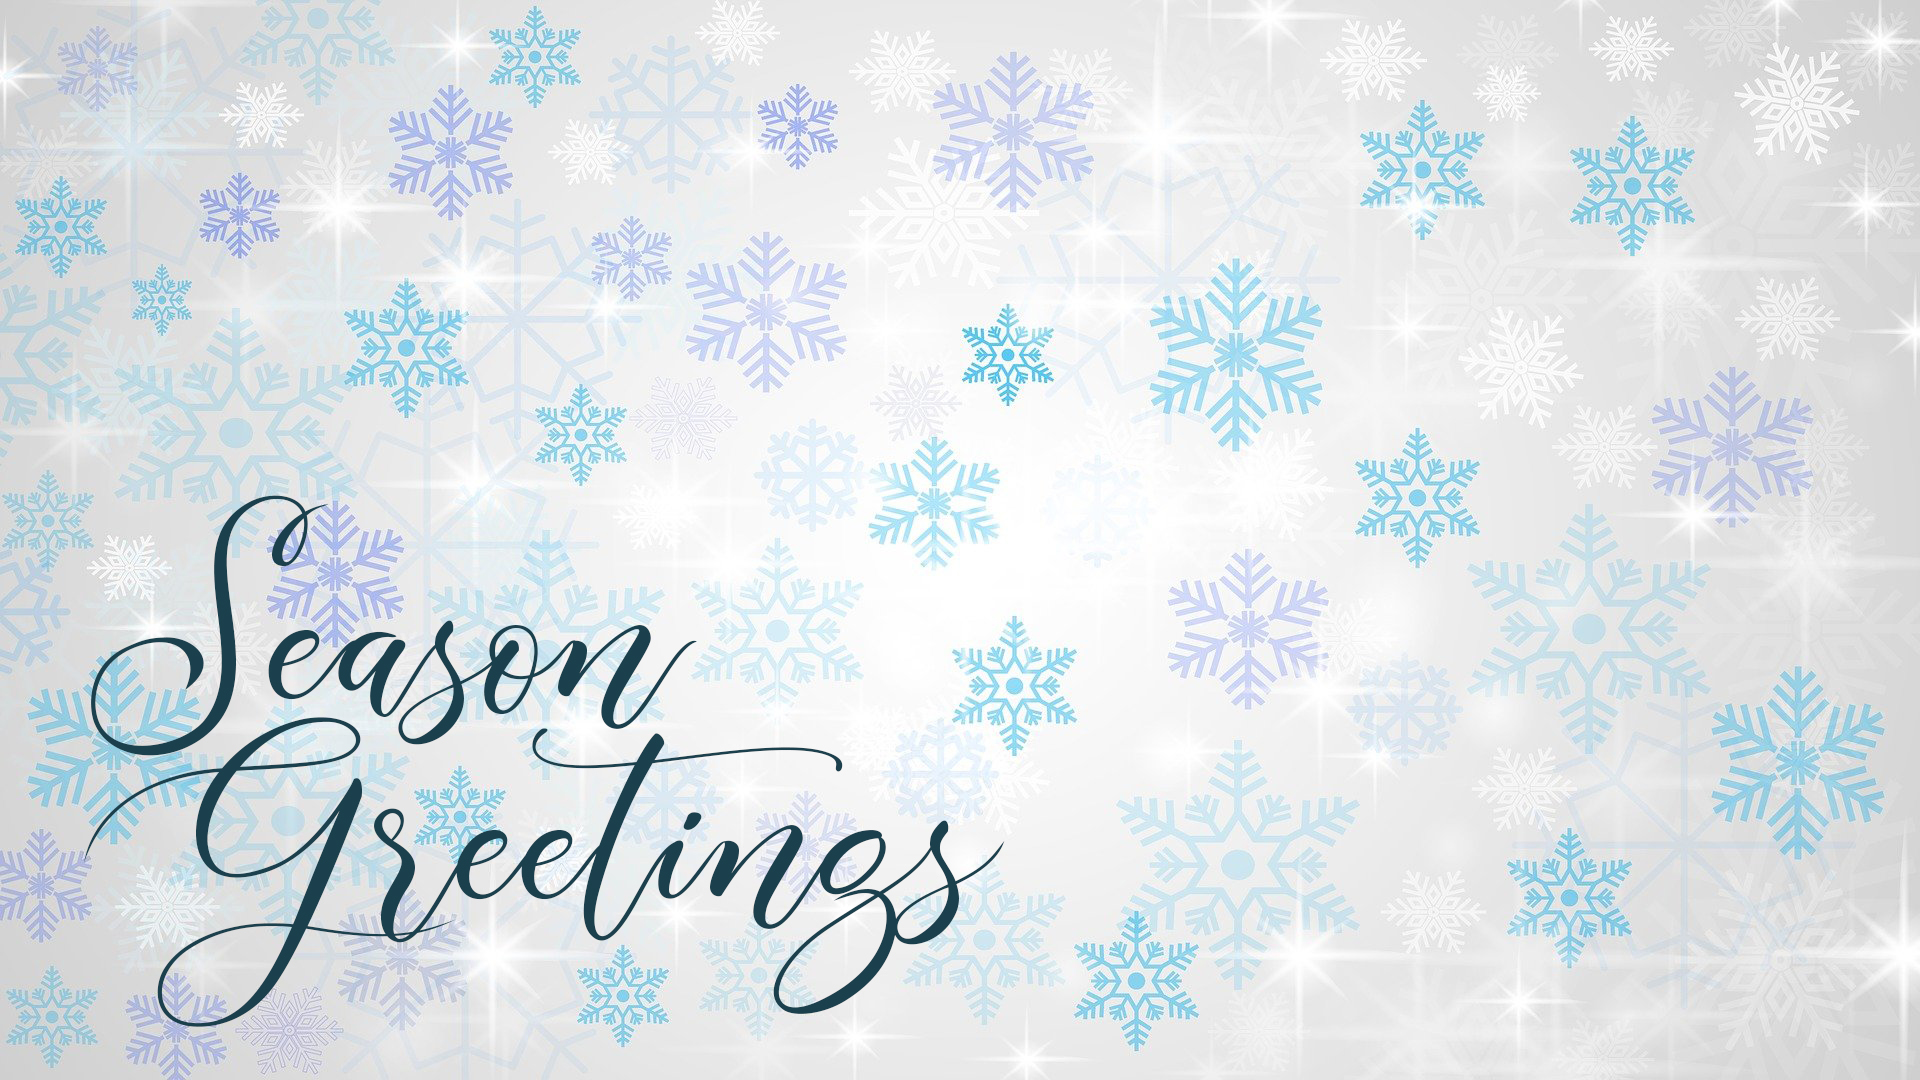 Grey background with blue, purple, and white snowflake pattern with twinkling white stars. Season Greetings is stacked in a cursive font on the bottom left corner of the graphic